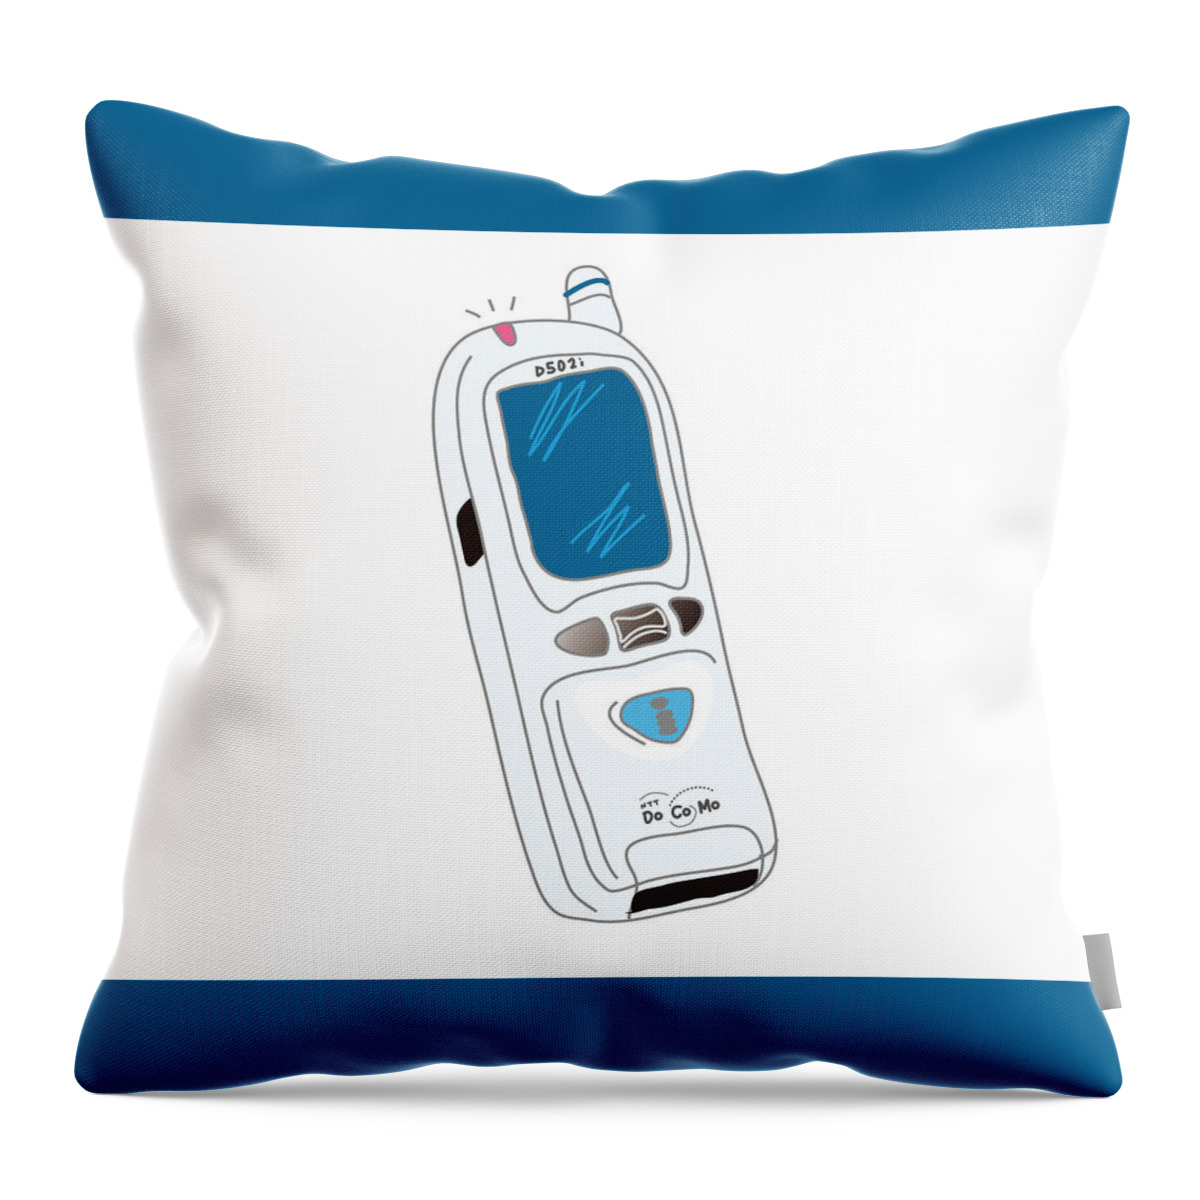  Throw Pillow featuring the digital art Japanese Classic Phone by Moto-hal